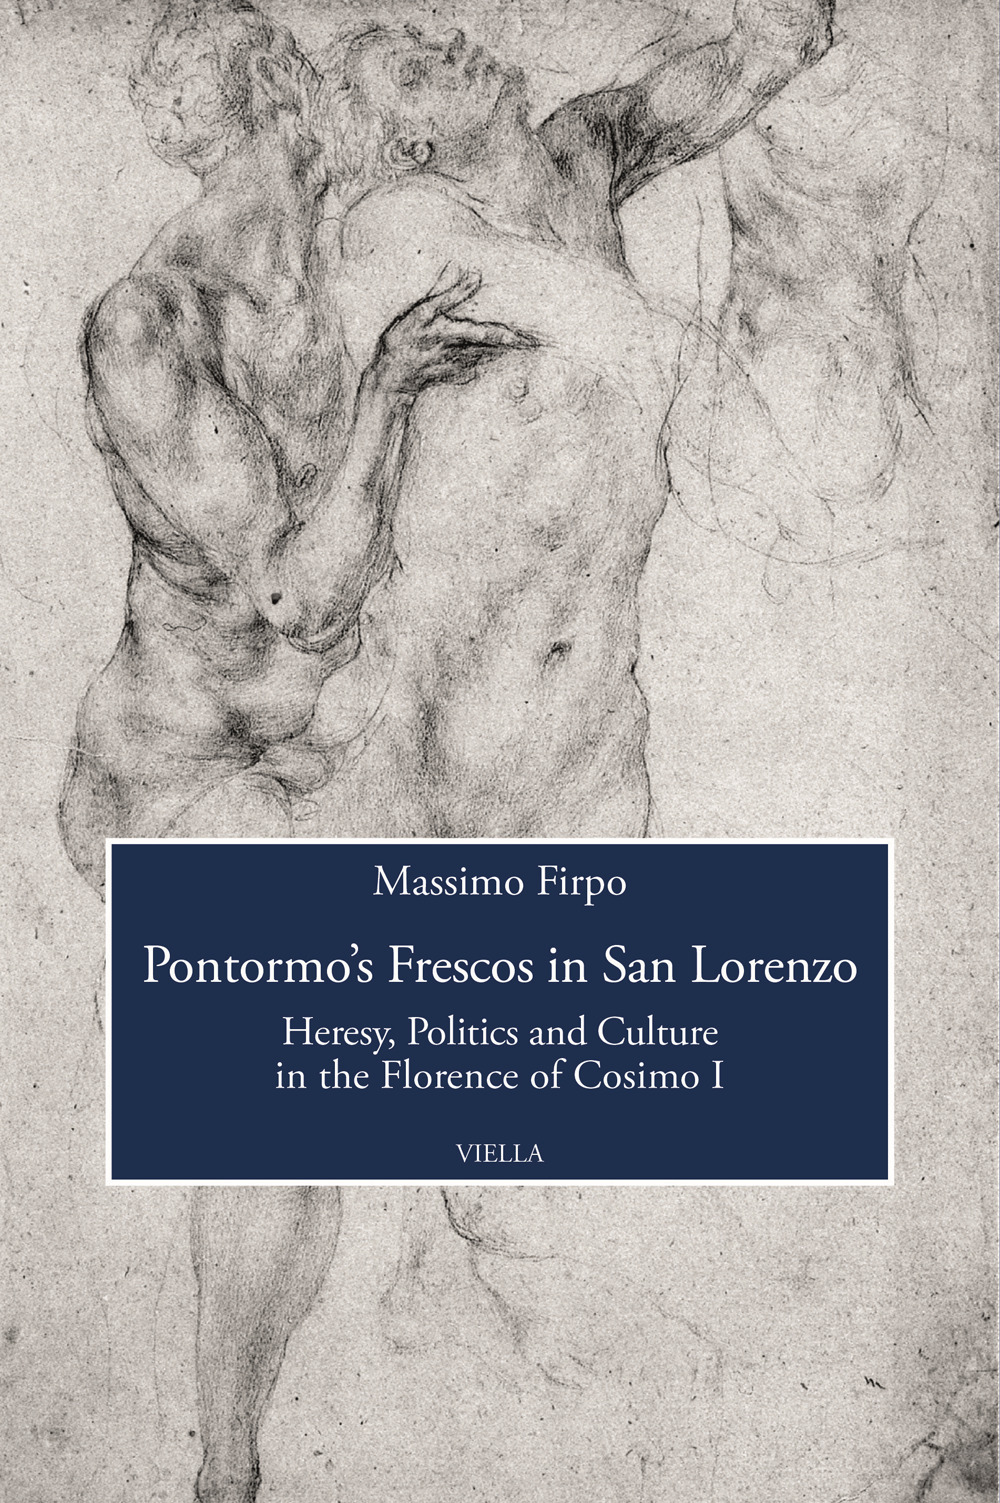 Pontormo's frescos in San Lorenzo. Heresy, politics and culture in the Florence of Cosimo I